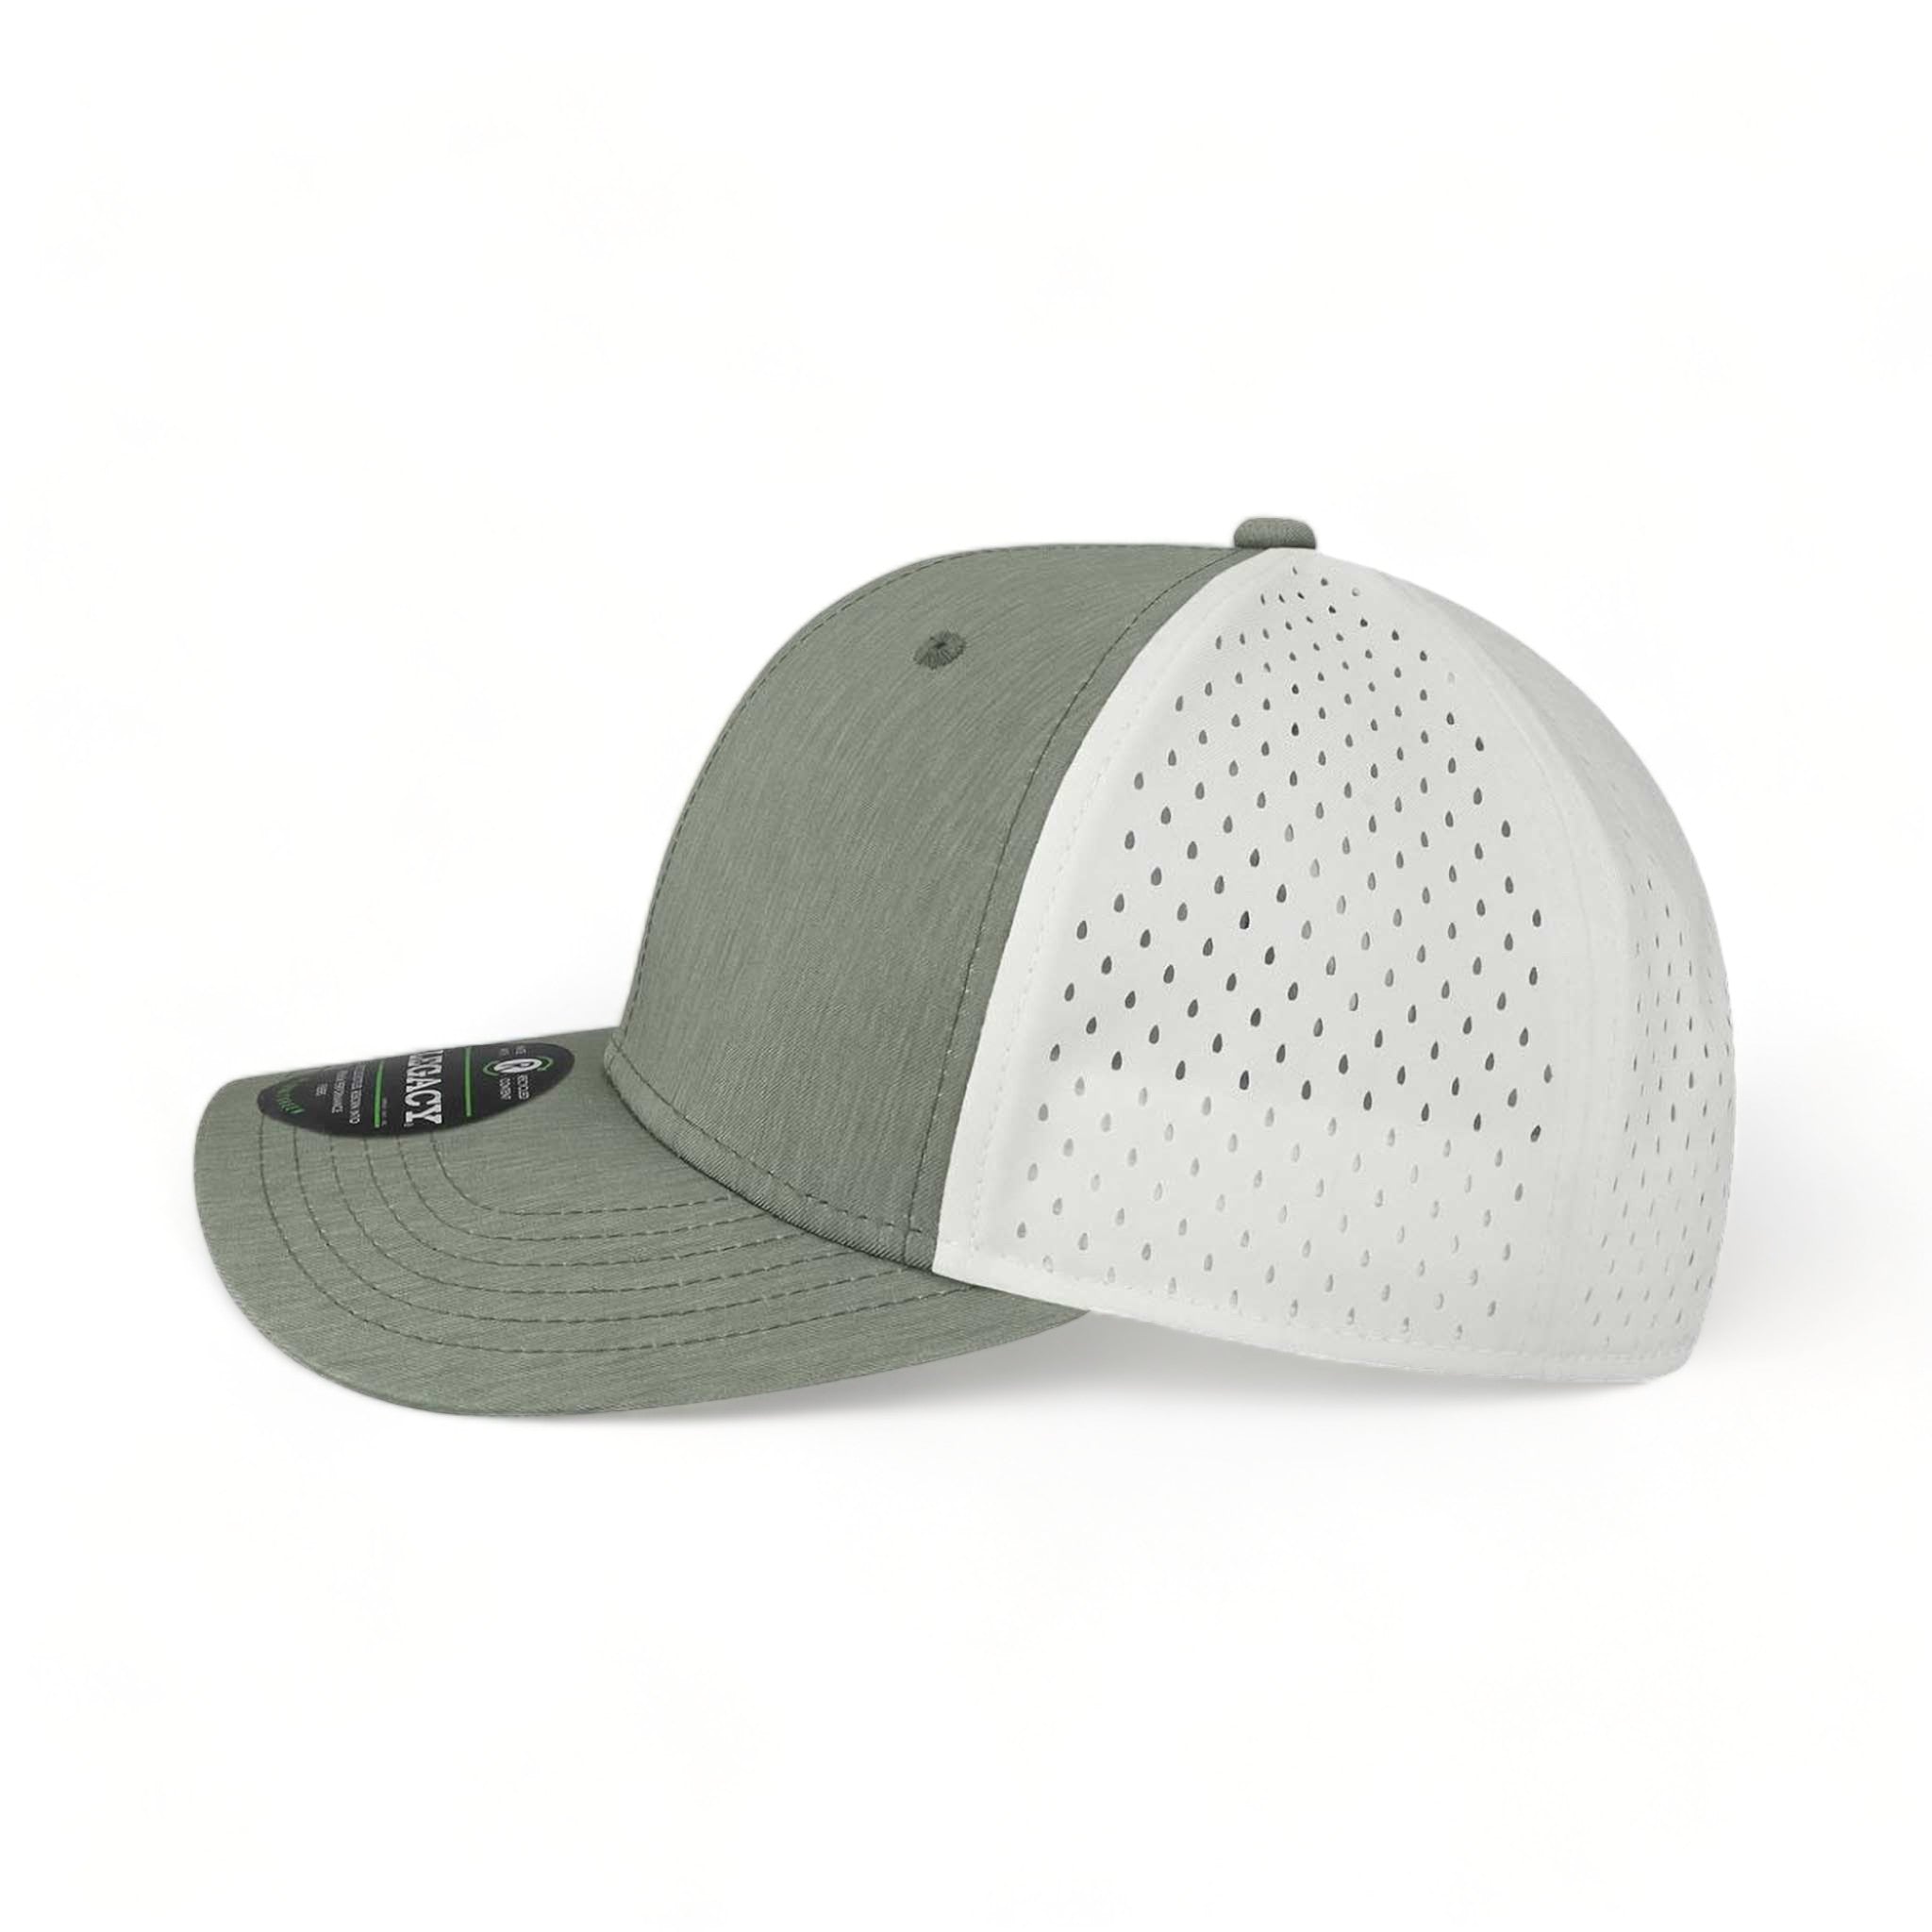 Side view of LEGACY REMPA custom hat in eco dark grey and white